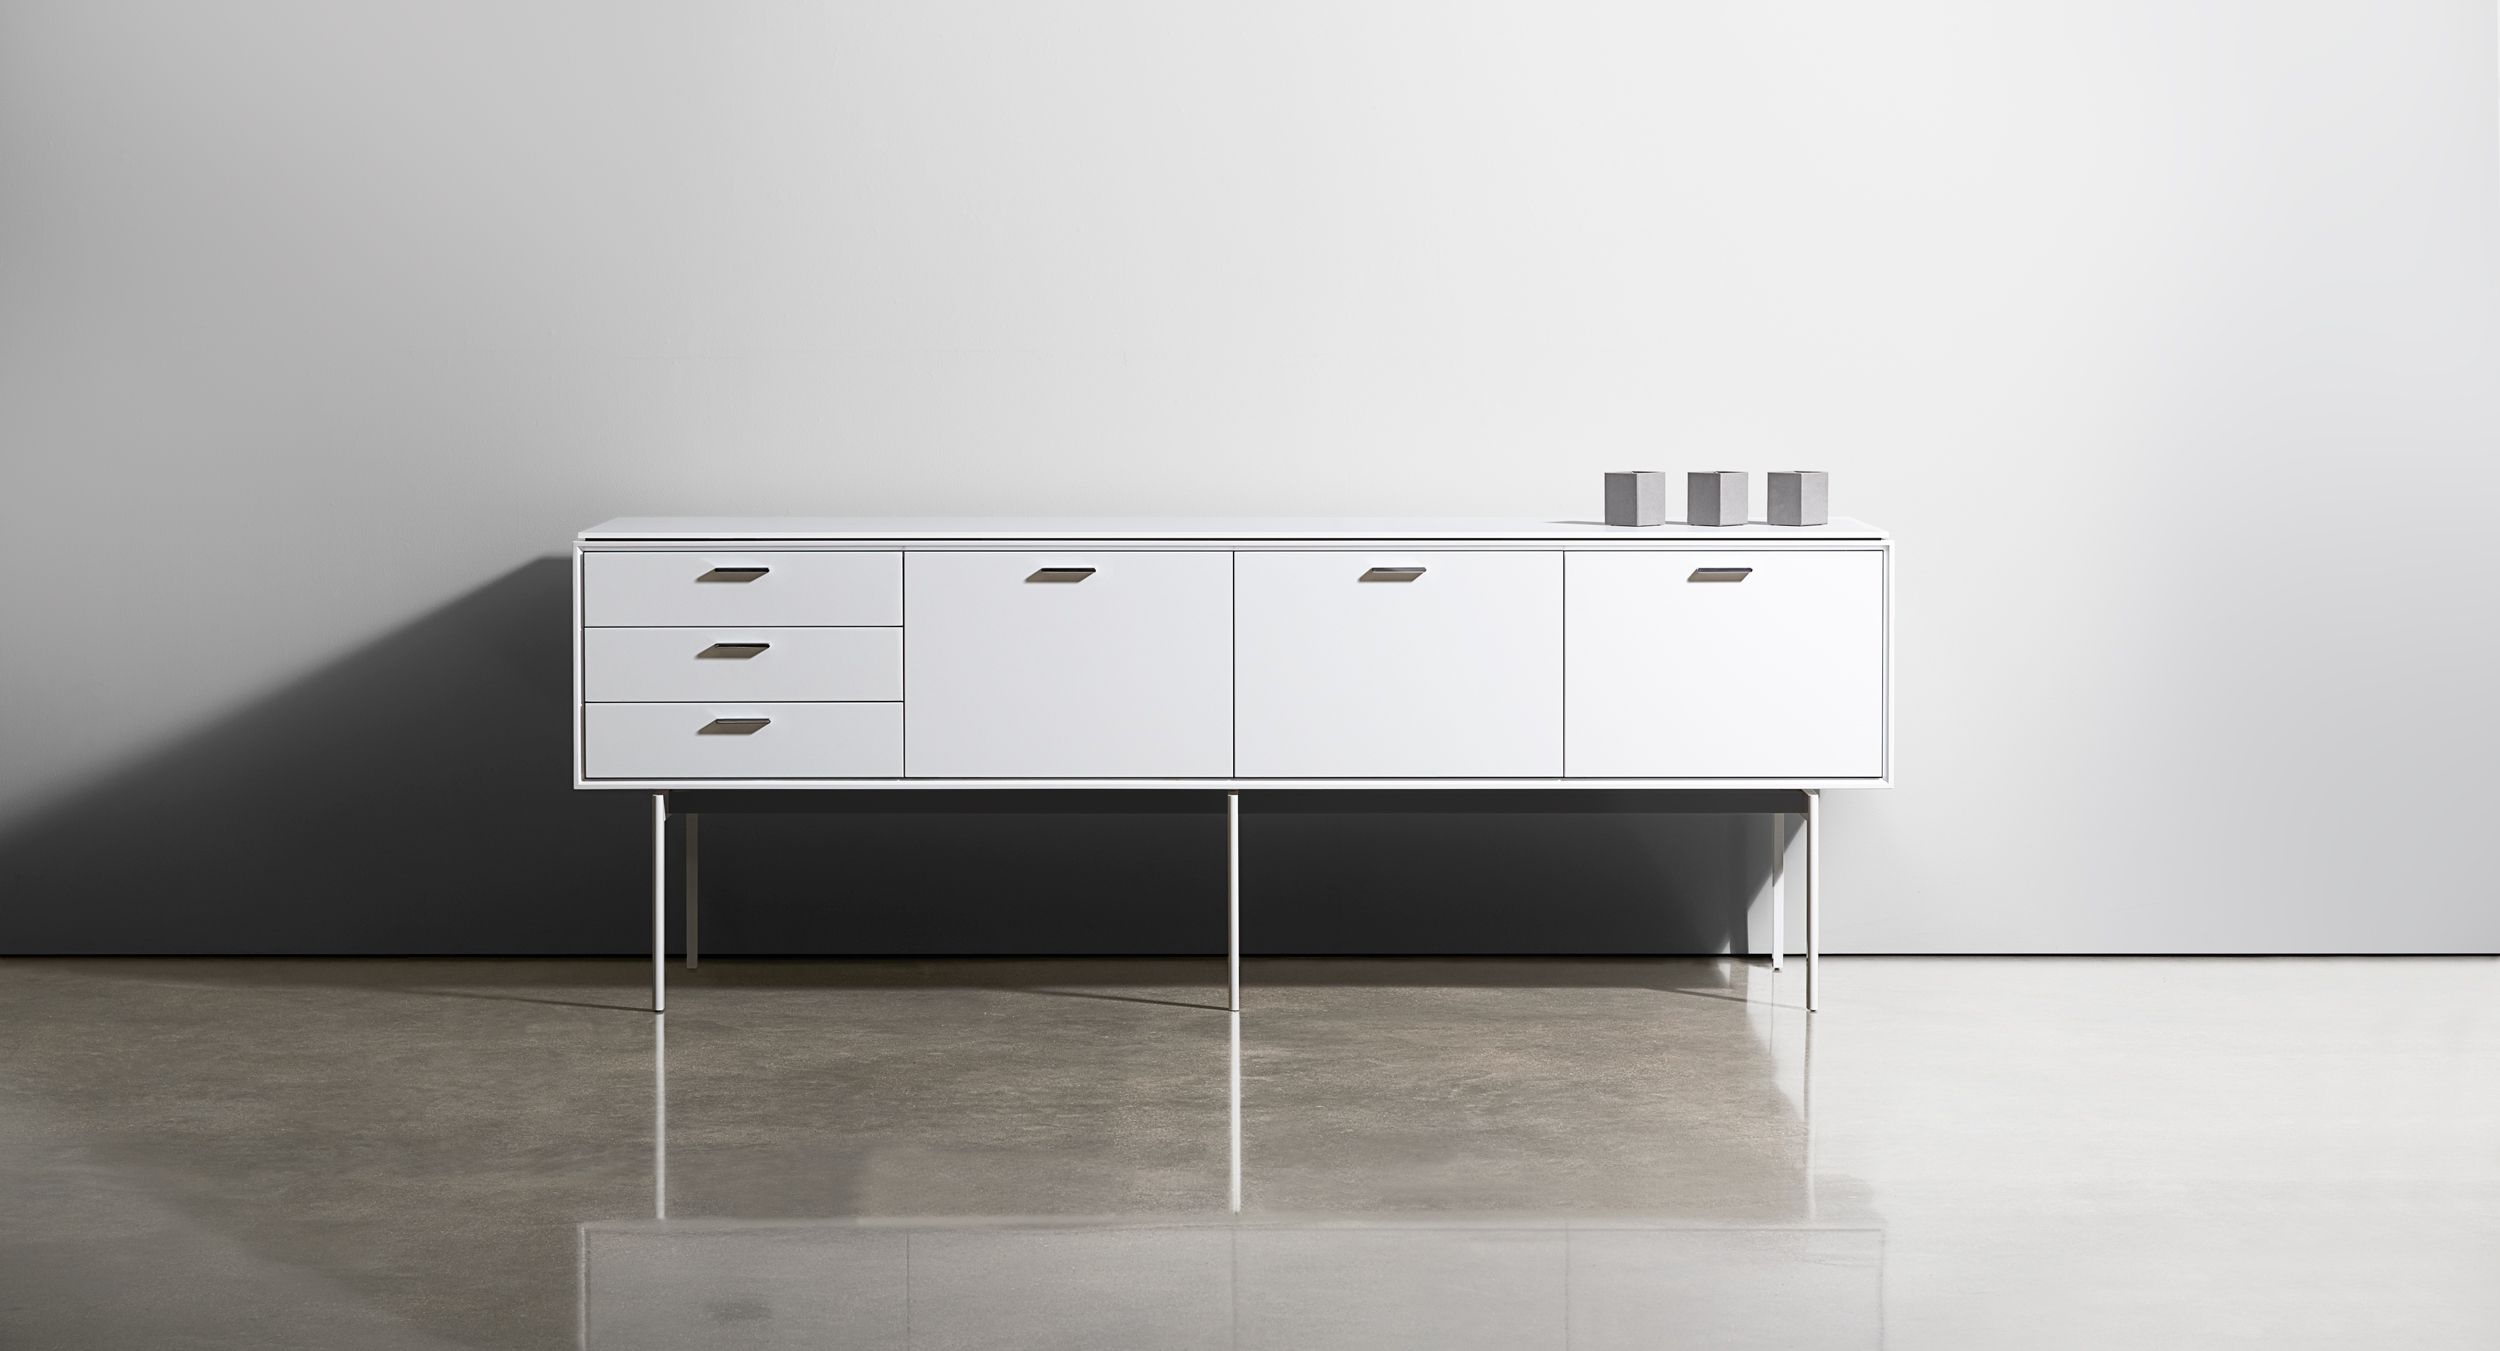 Halo's elegant design supports a complete and flexible system to meet all of your storage needs.